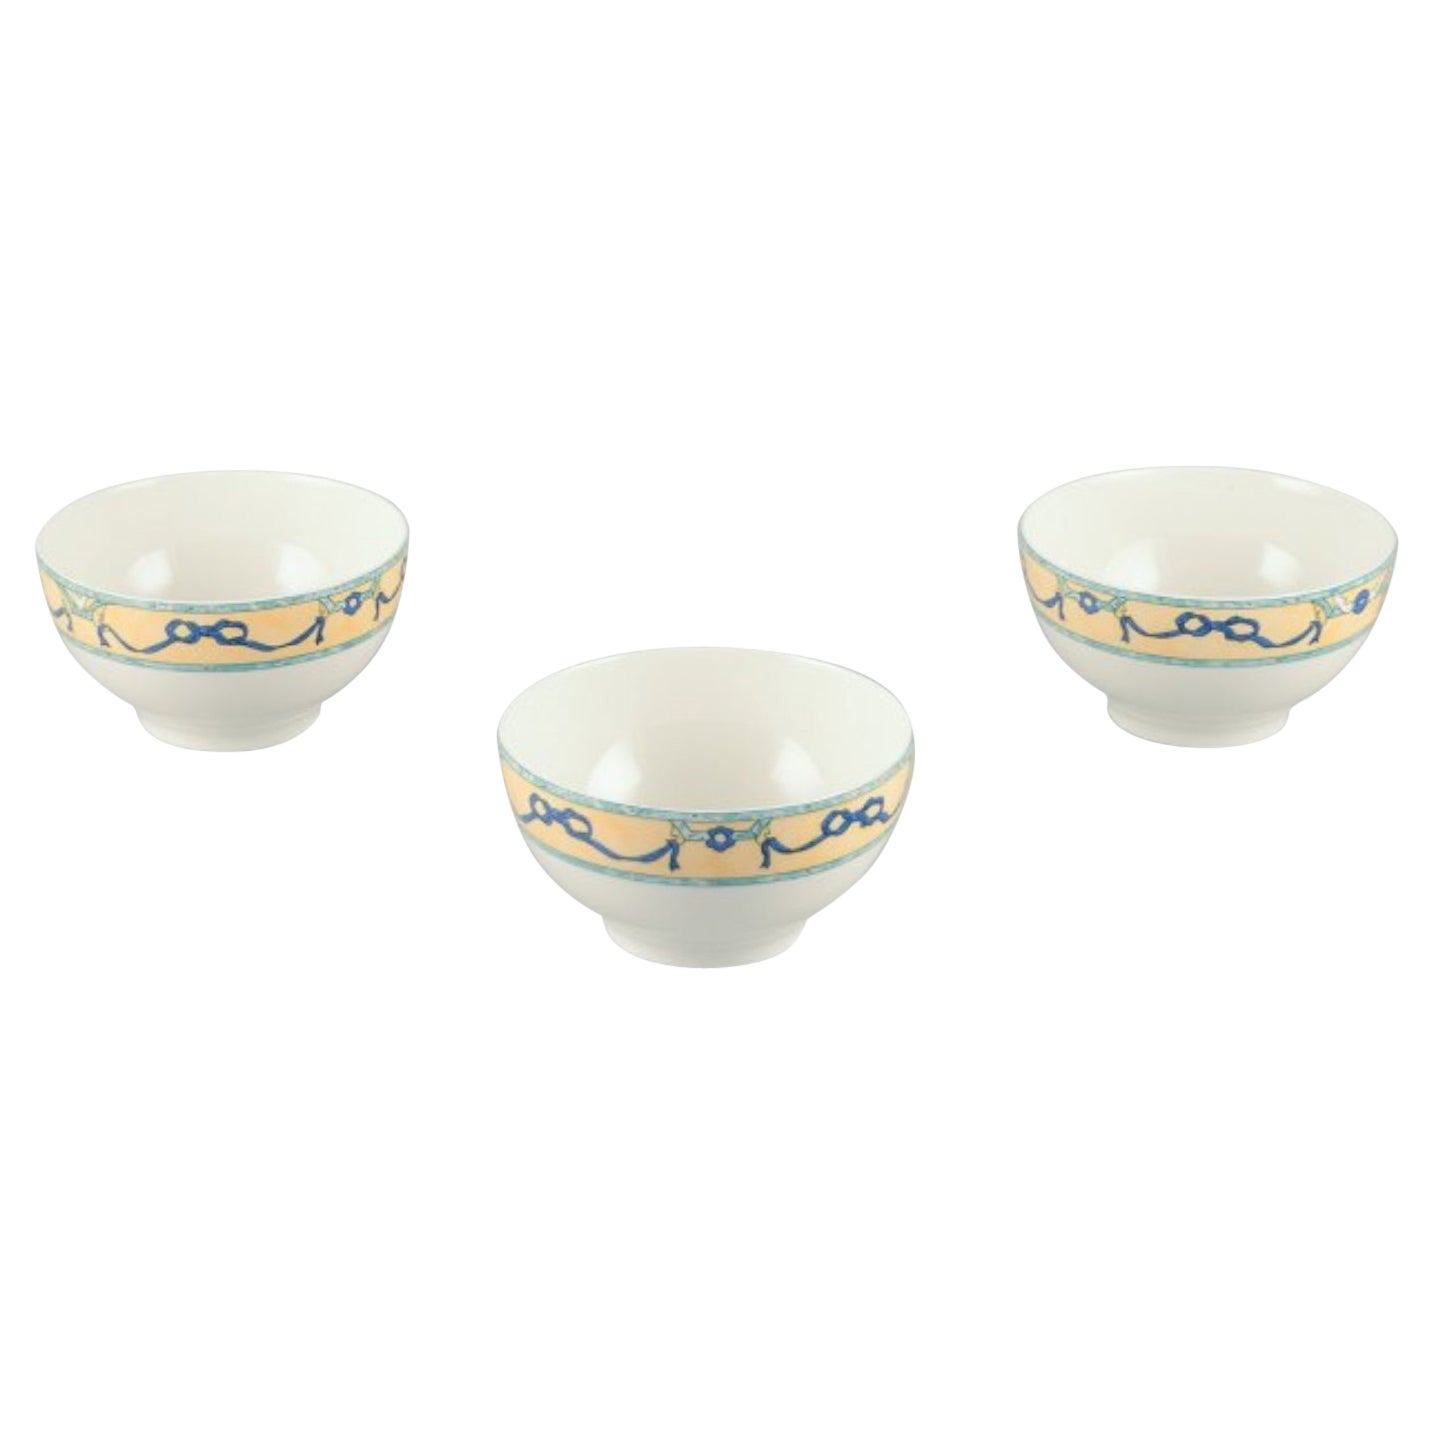 Villeroy & Boch, Luxembourg, set of three "Castellina" porcelain bowls. For Sale